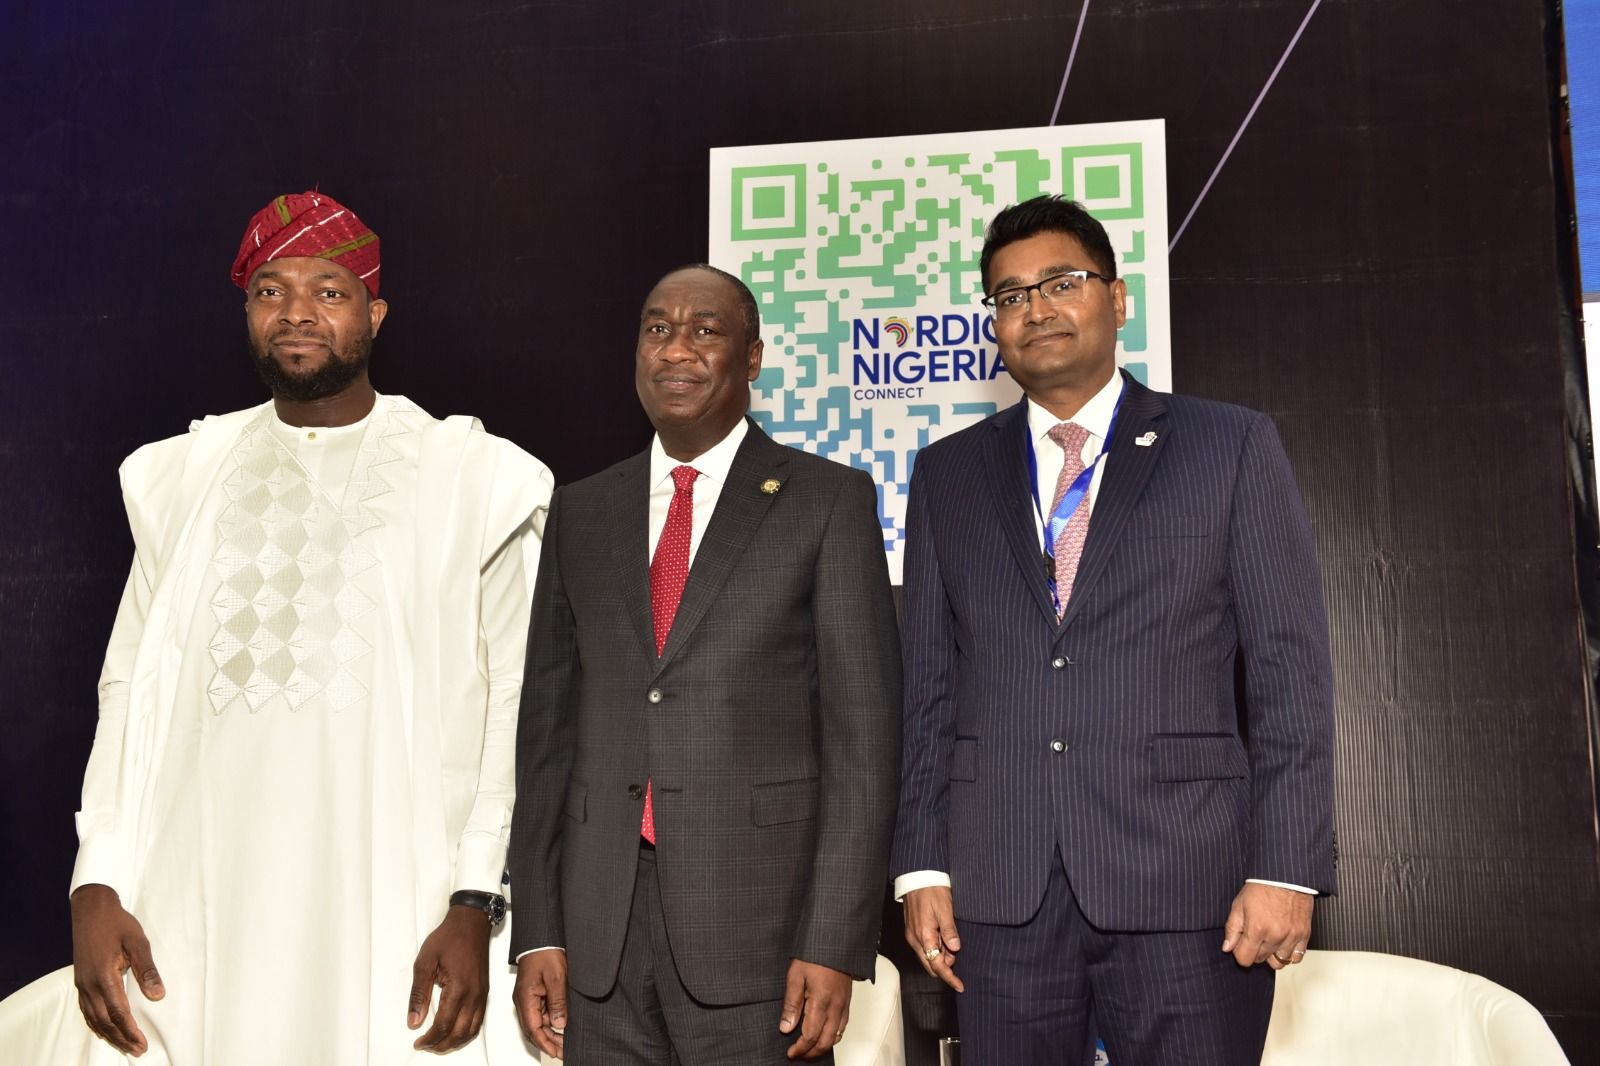 LFZ Attracts Nordic Investors to Strengthen Foreign Direct Investment in Nigeria